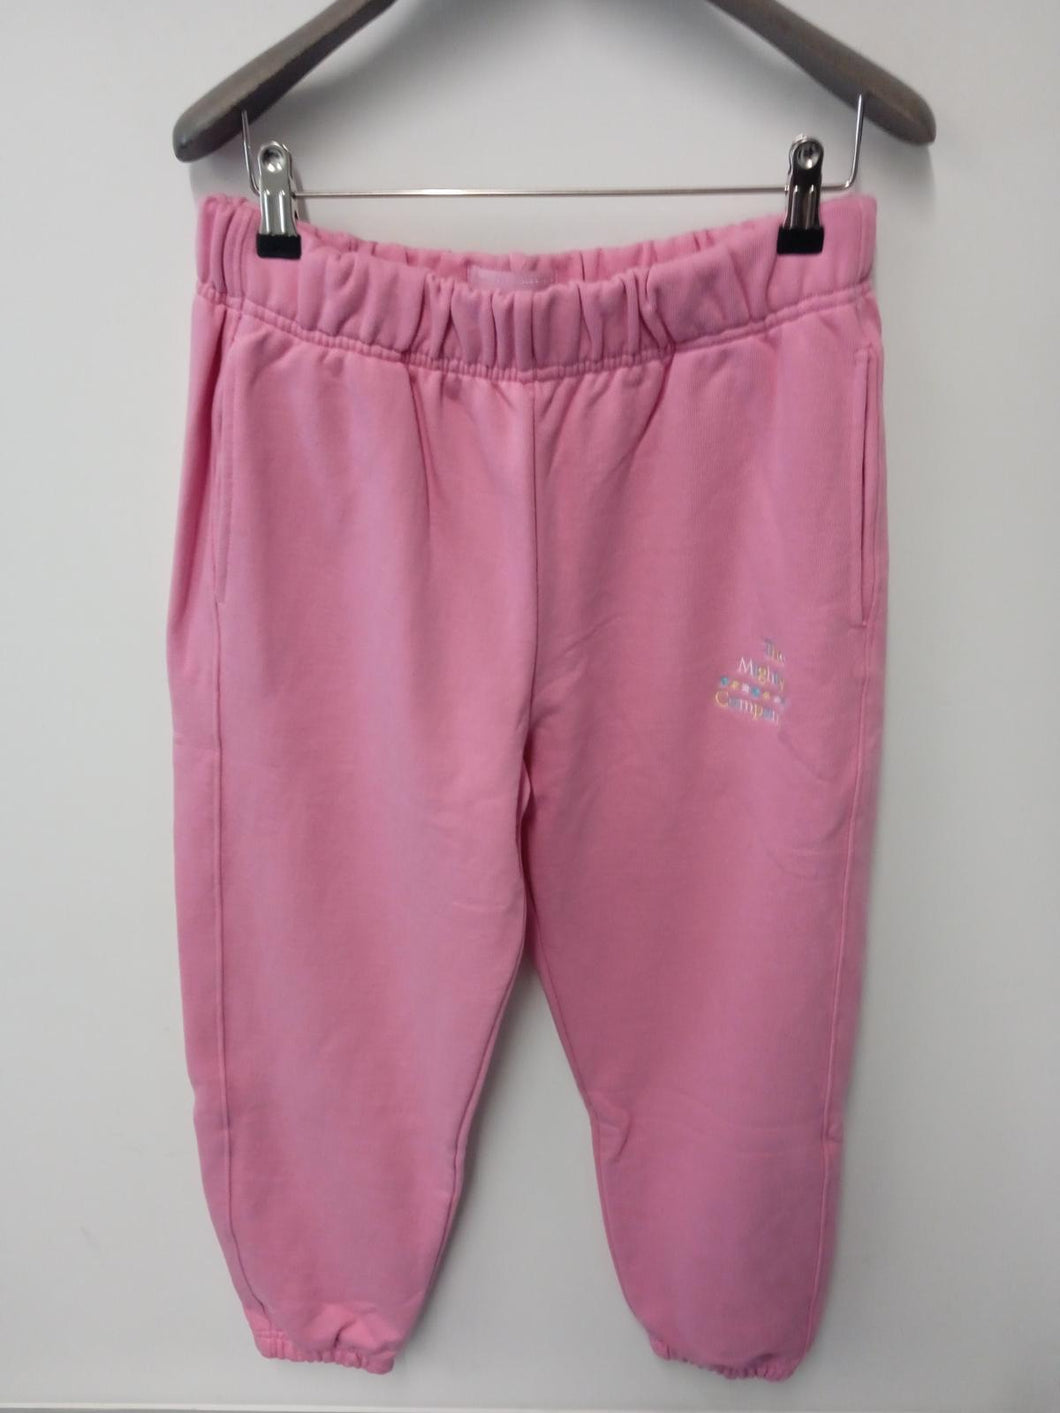 THE MIGHTY COMPANY Ladies Pink Cotton Elasticated Waist Jogging Bottoms W30L26